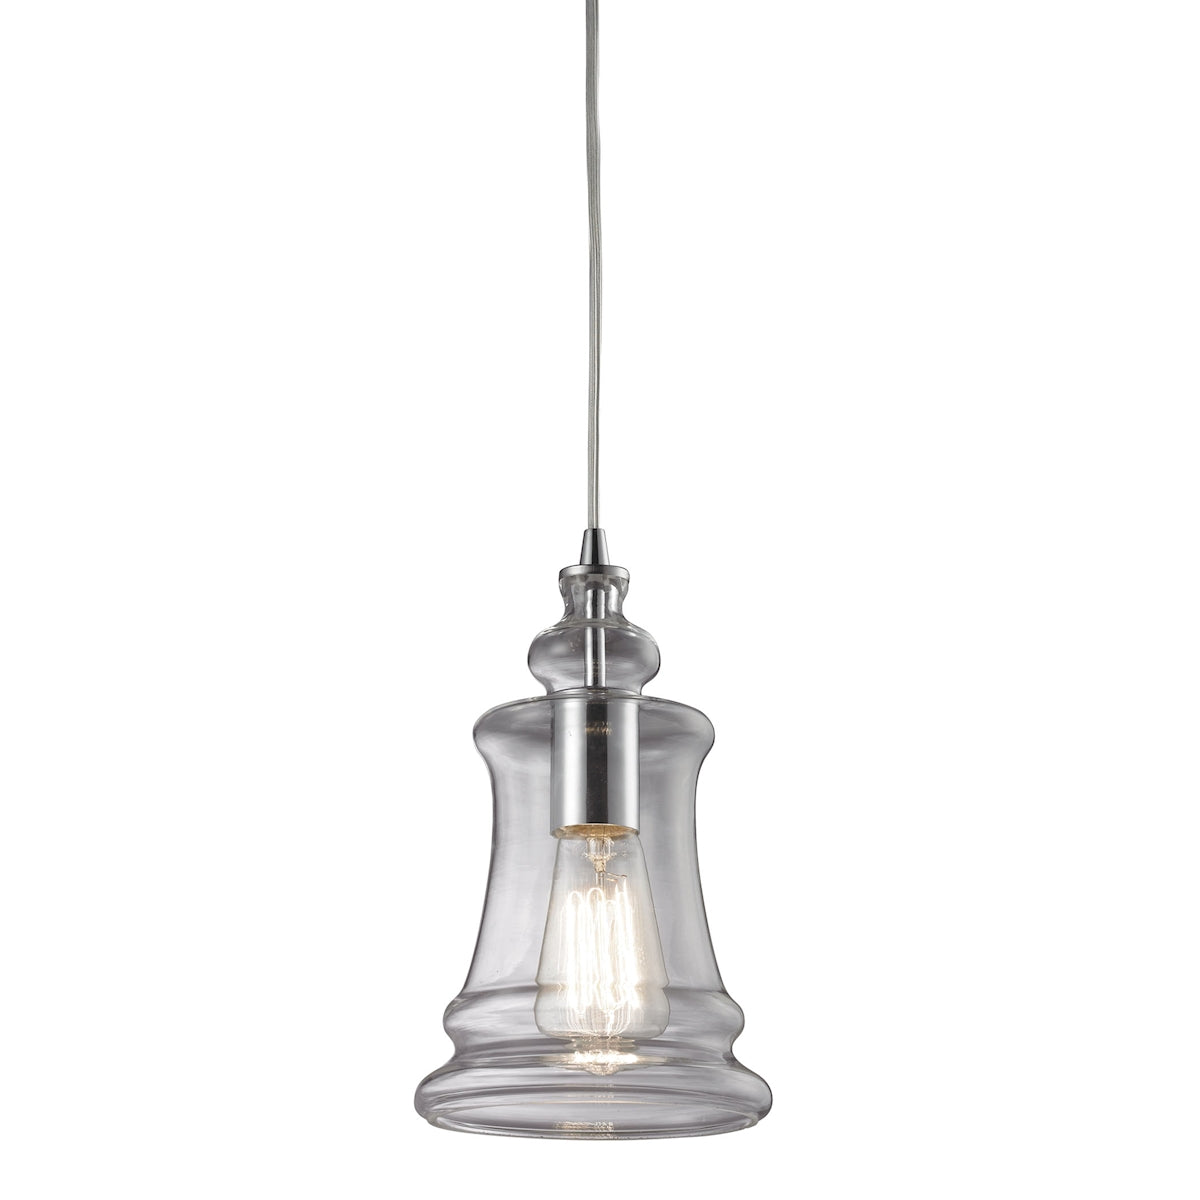 ELK Lighting 60052-1 Menlow Park 1-Light Mini Pendant in Polished Chrome with Smoked Glass